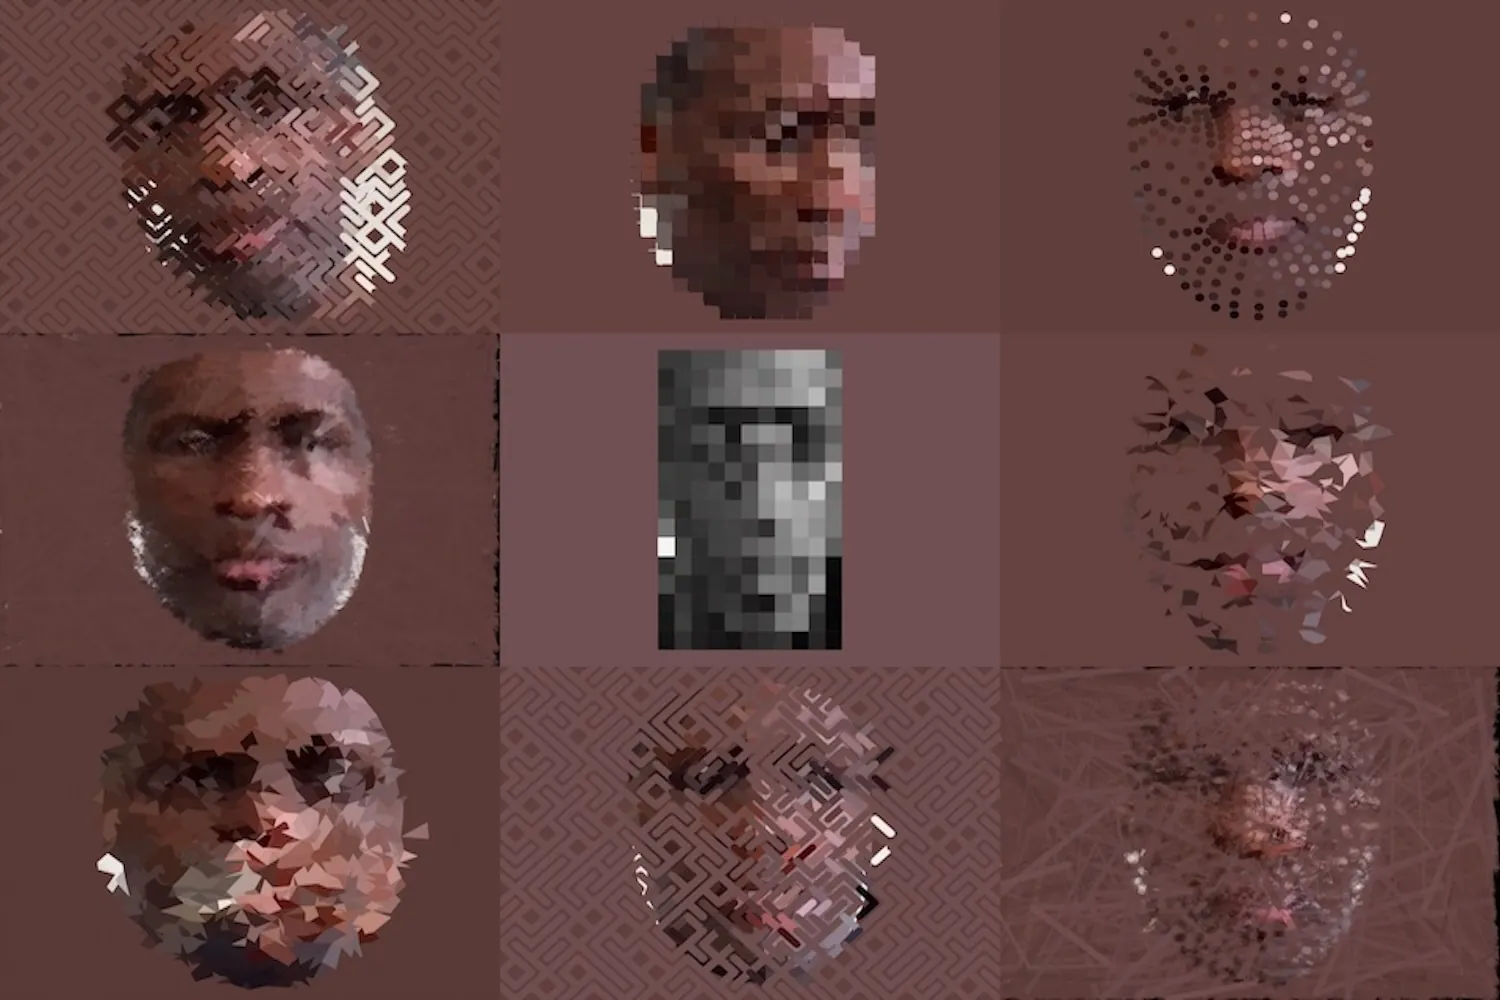 9 video effects of the author's face in a 3x3 grid